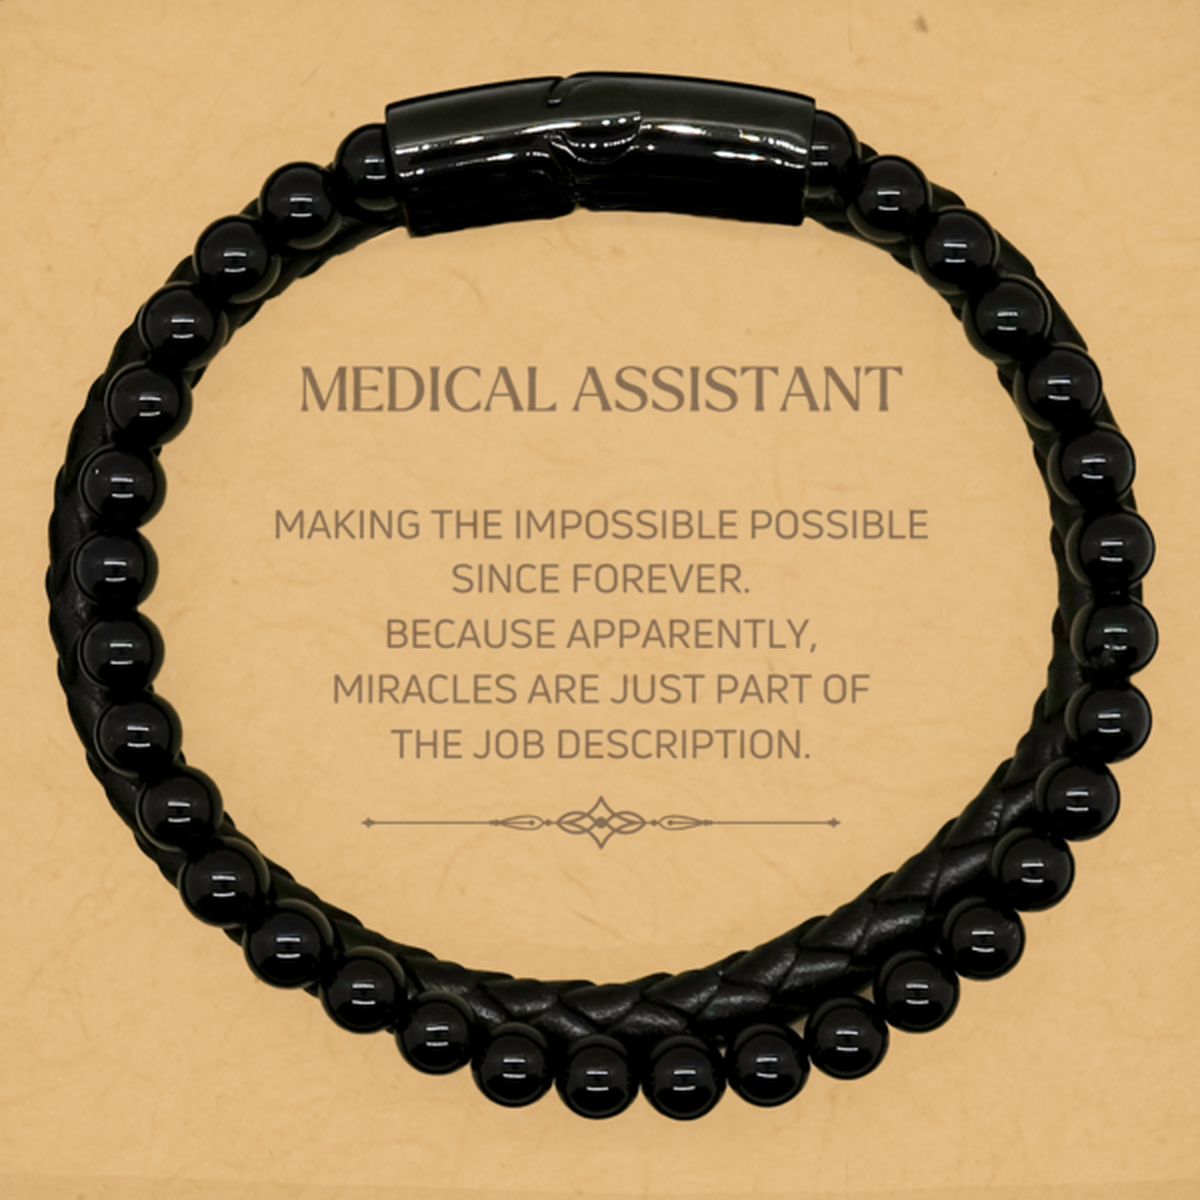 Funny Medical Assistant Gifts, Miracles are just part of the job description, Inspirational Birthday Stone Leather Bracelets For Medical Assistant, Men, Women, Coworkers, Friends, Boss